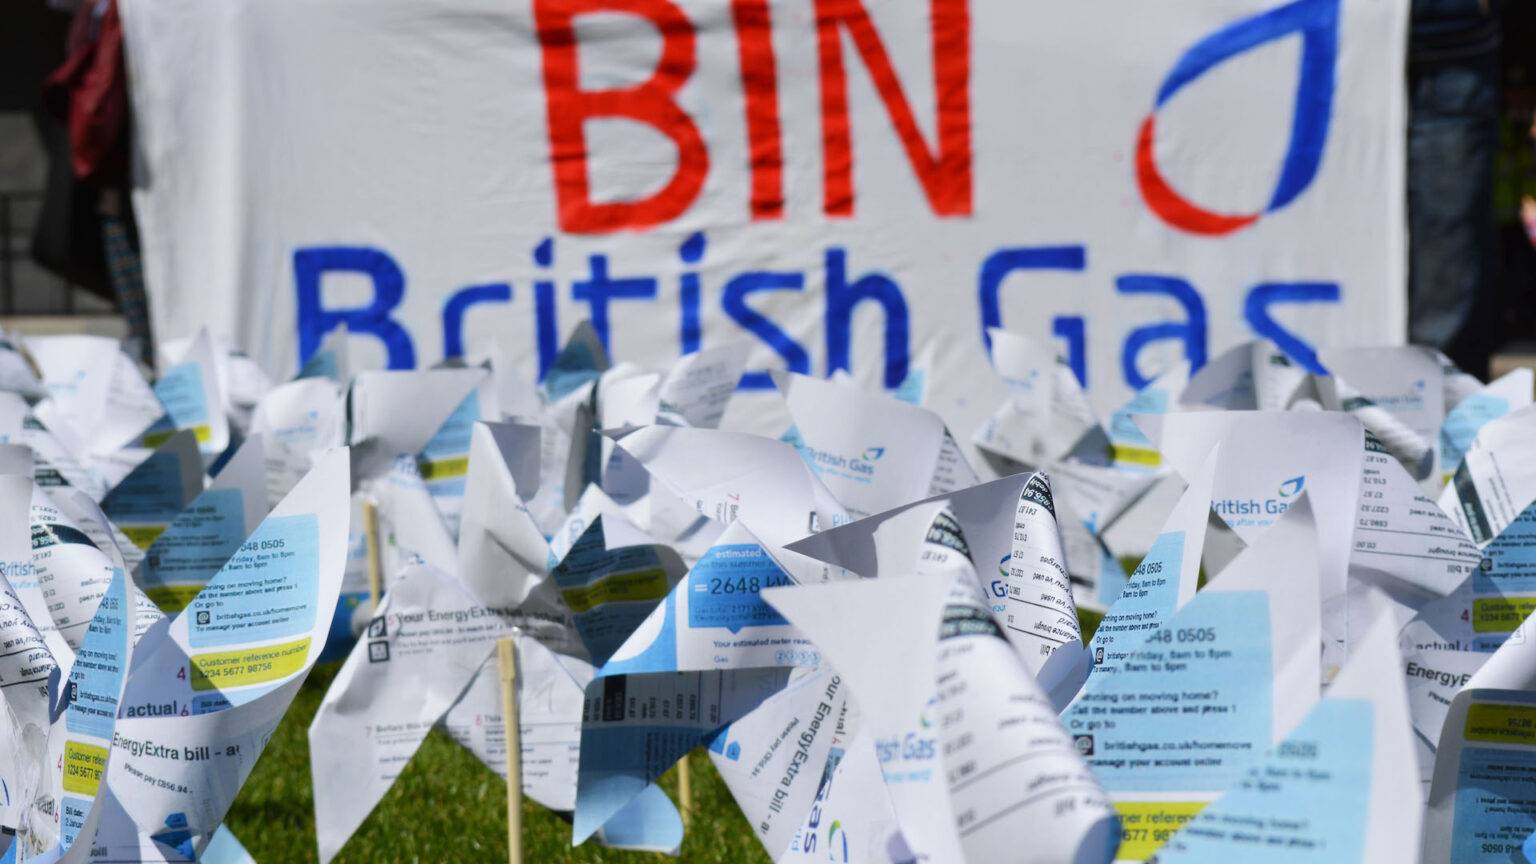 British Gas: Anger as energy bill change leads to record profits